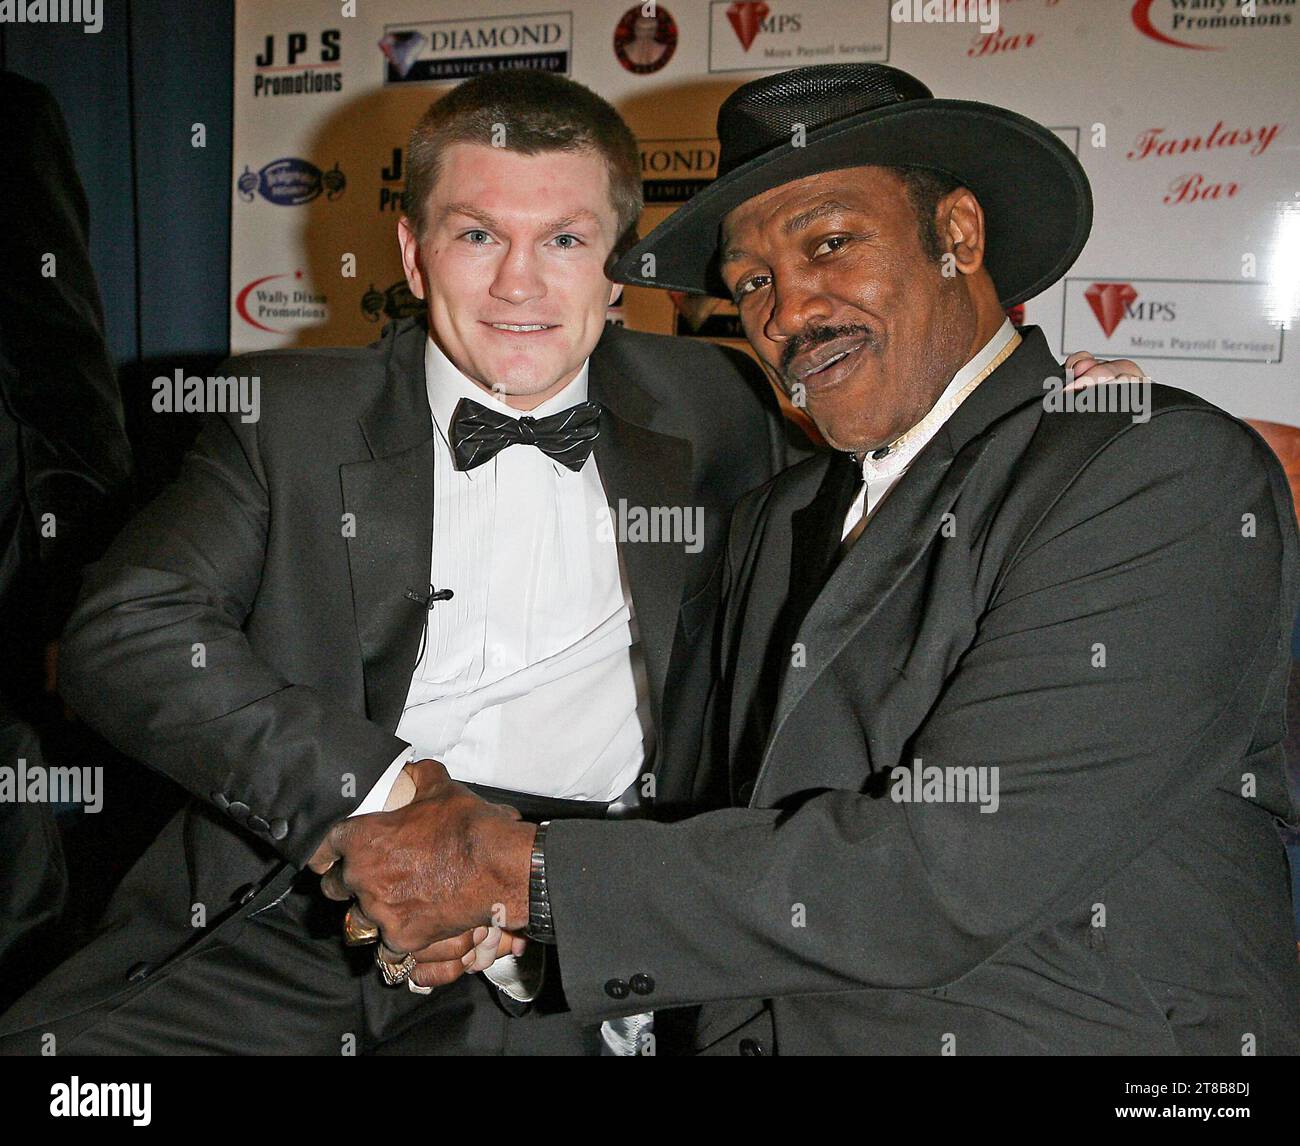 British boxer Ricky Hatton meets legendary US boxer Joe Frazier at the Piccadilly Hotel, Manchester, UK, 2006. Stock Photo